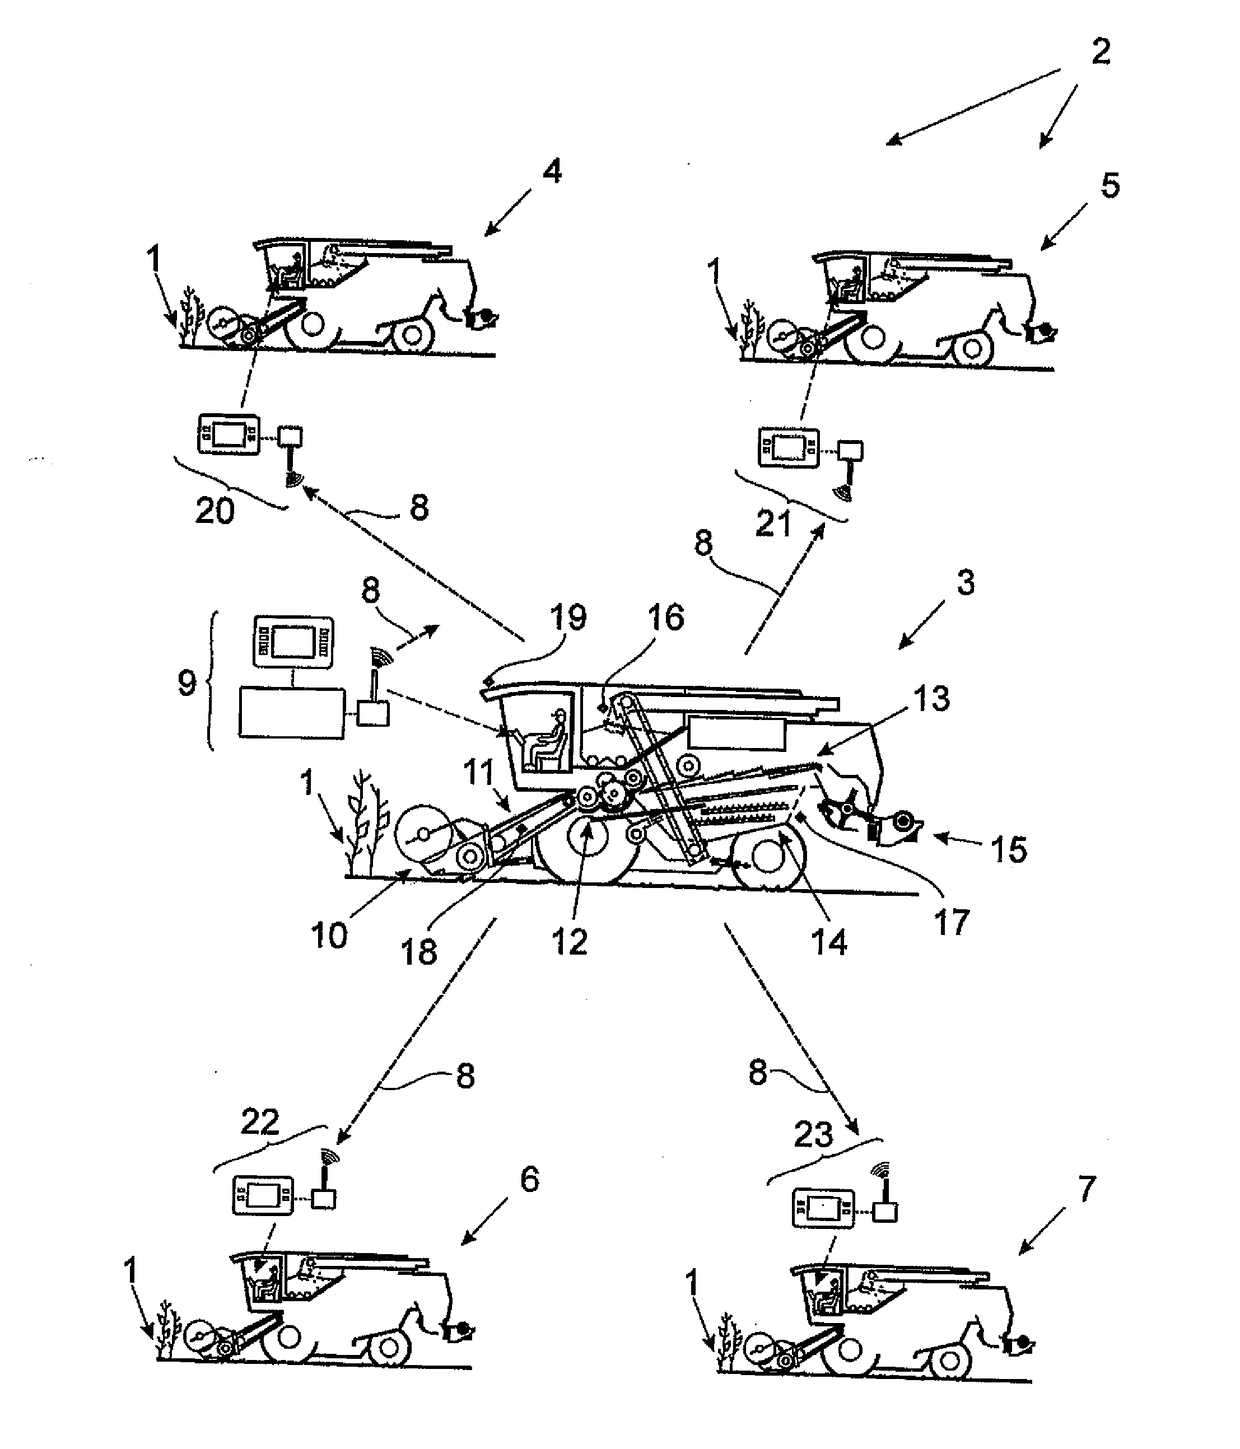 Method for executing an agricultural harvesting process